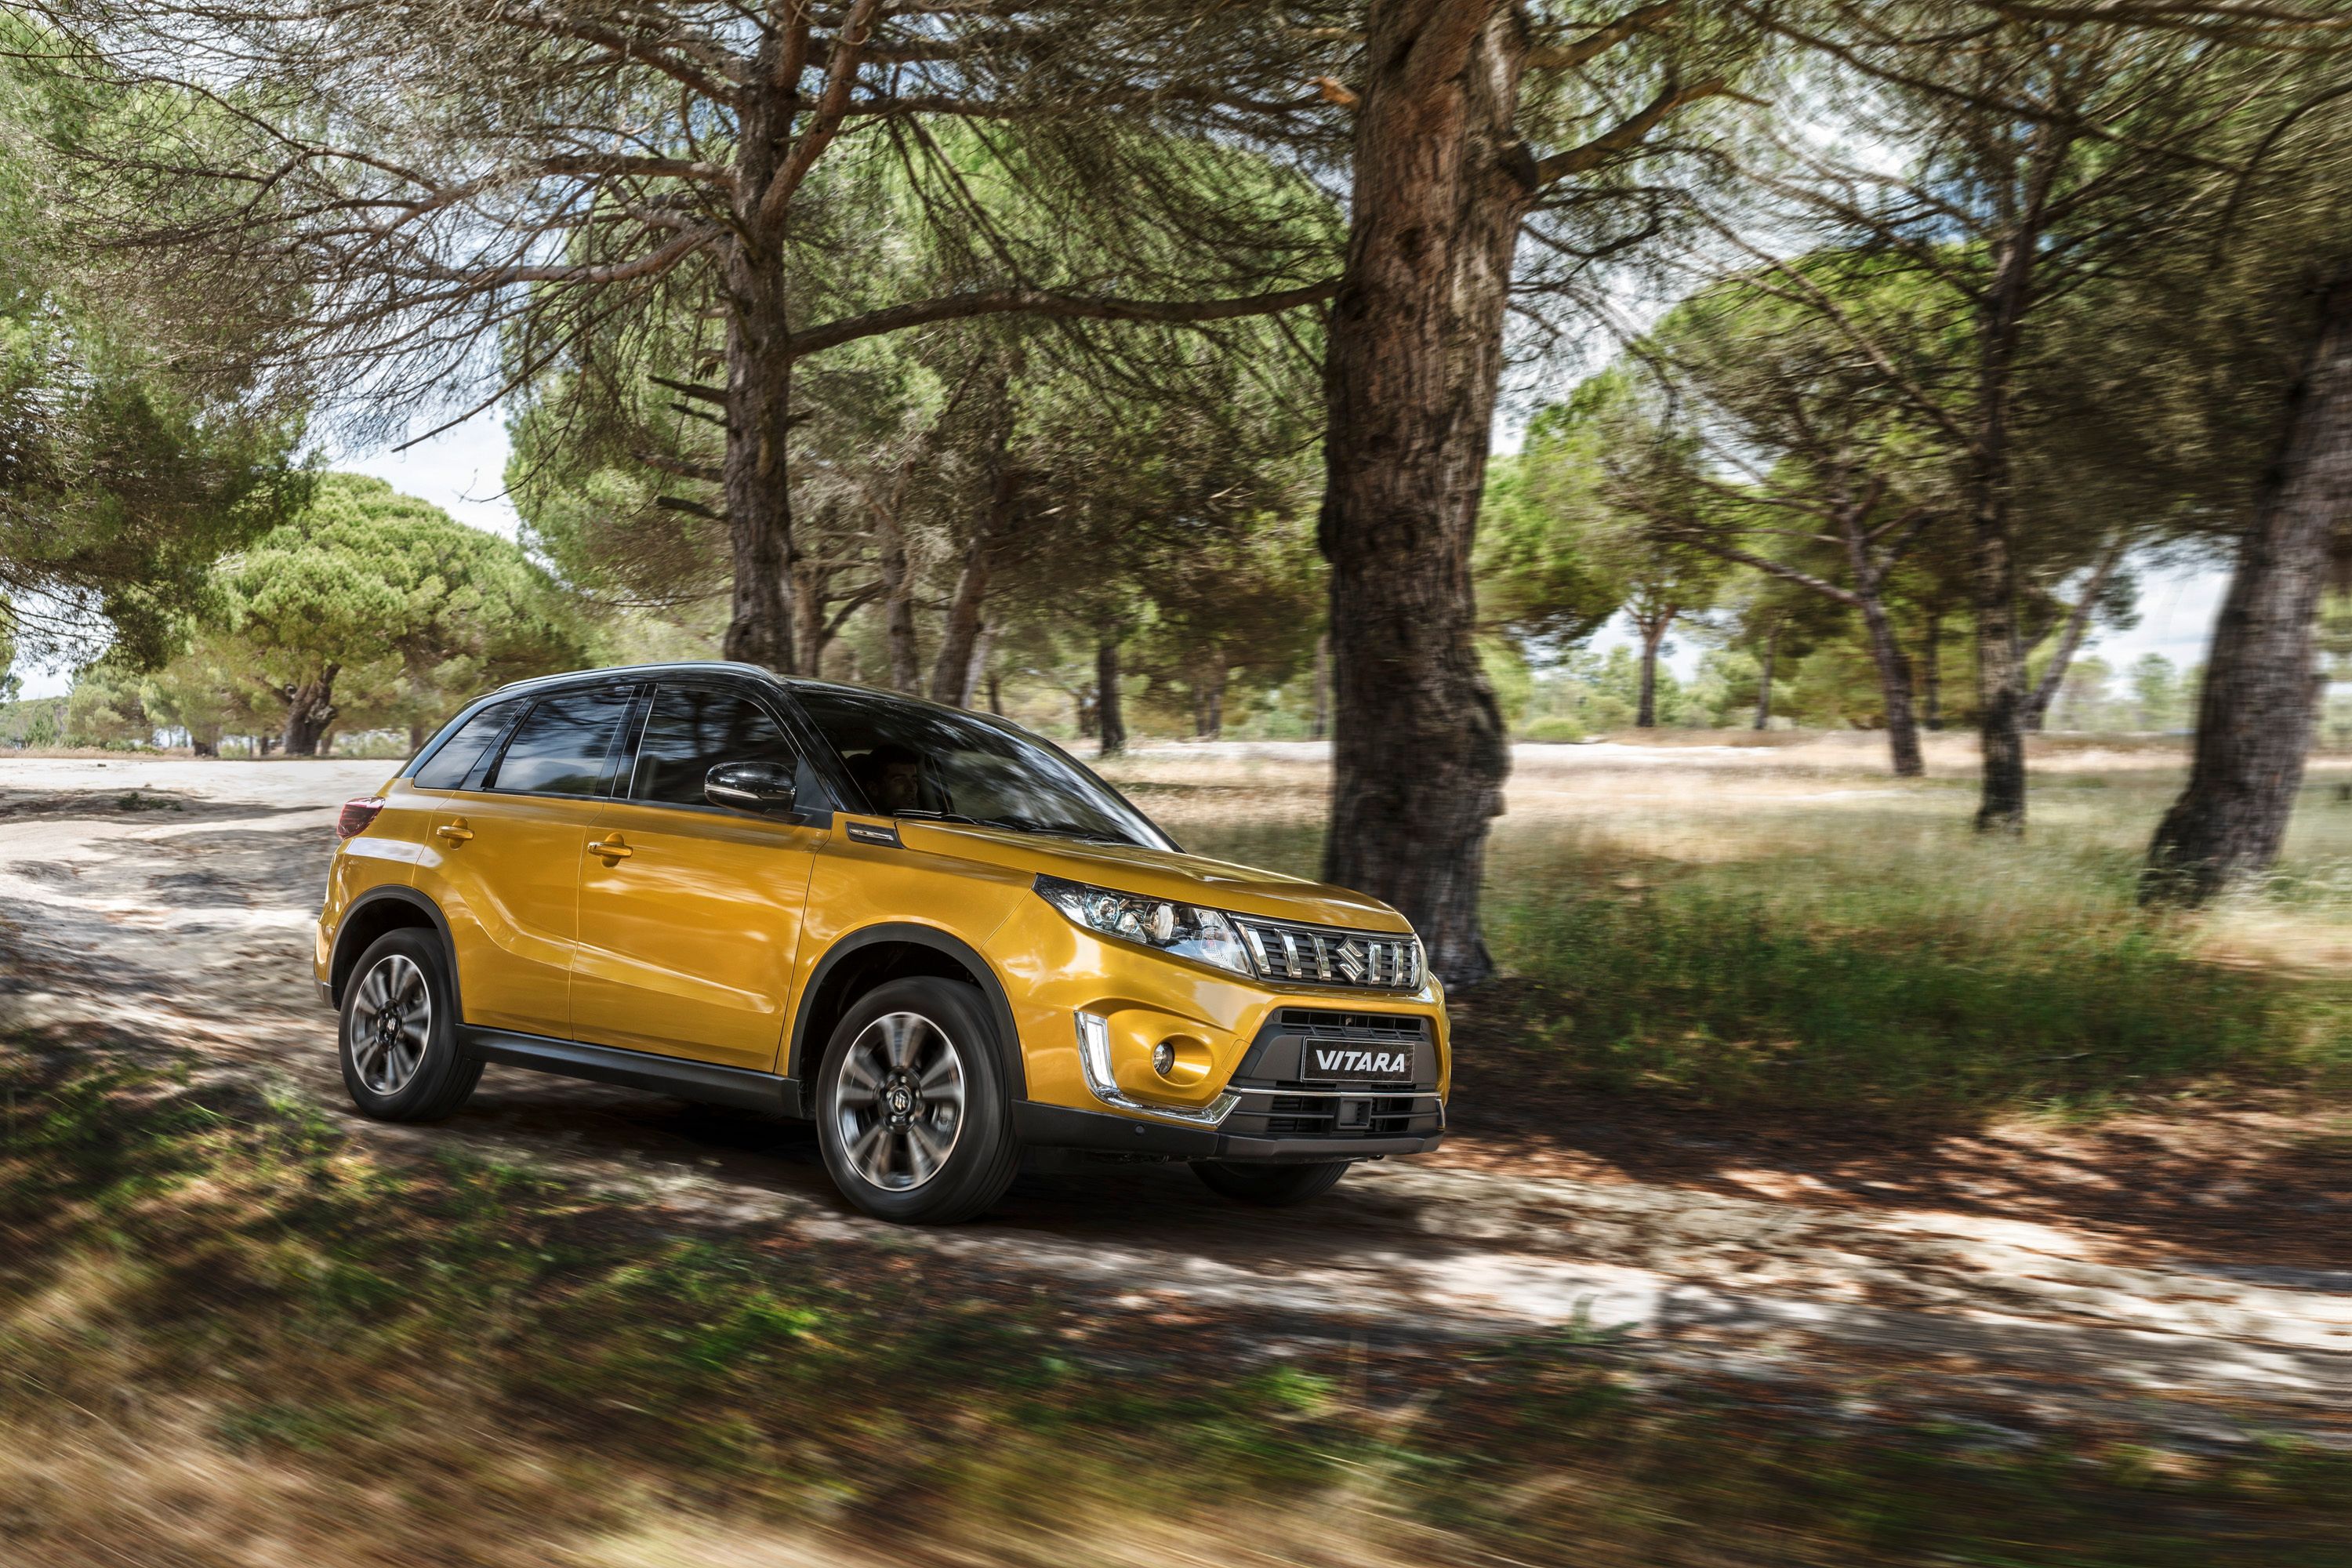 2019 2019 Vitara Facelift Looks Aggressive In These New Images